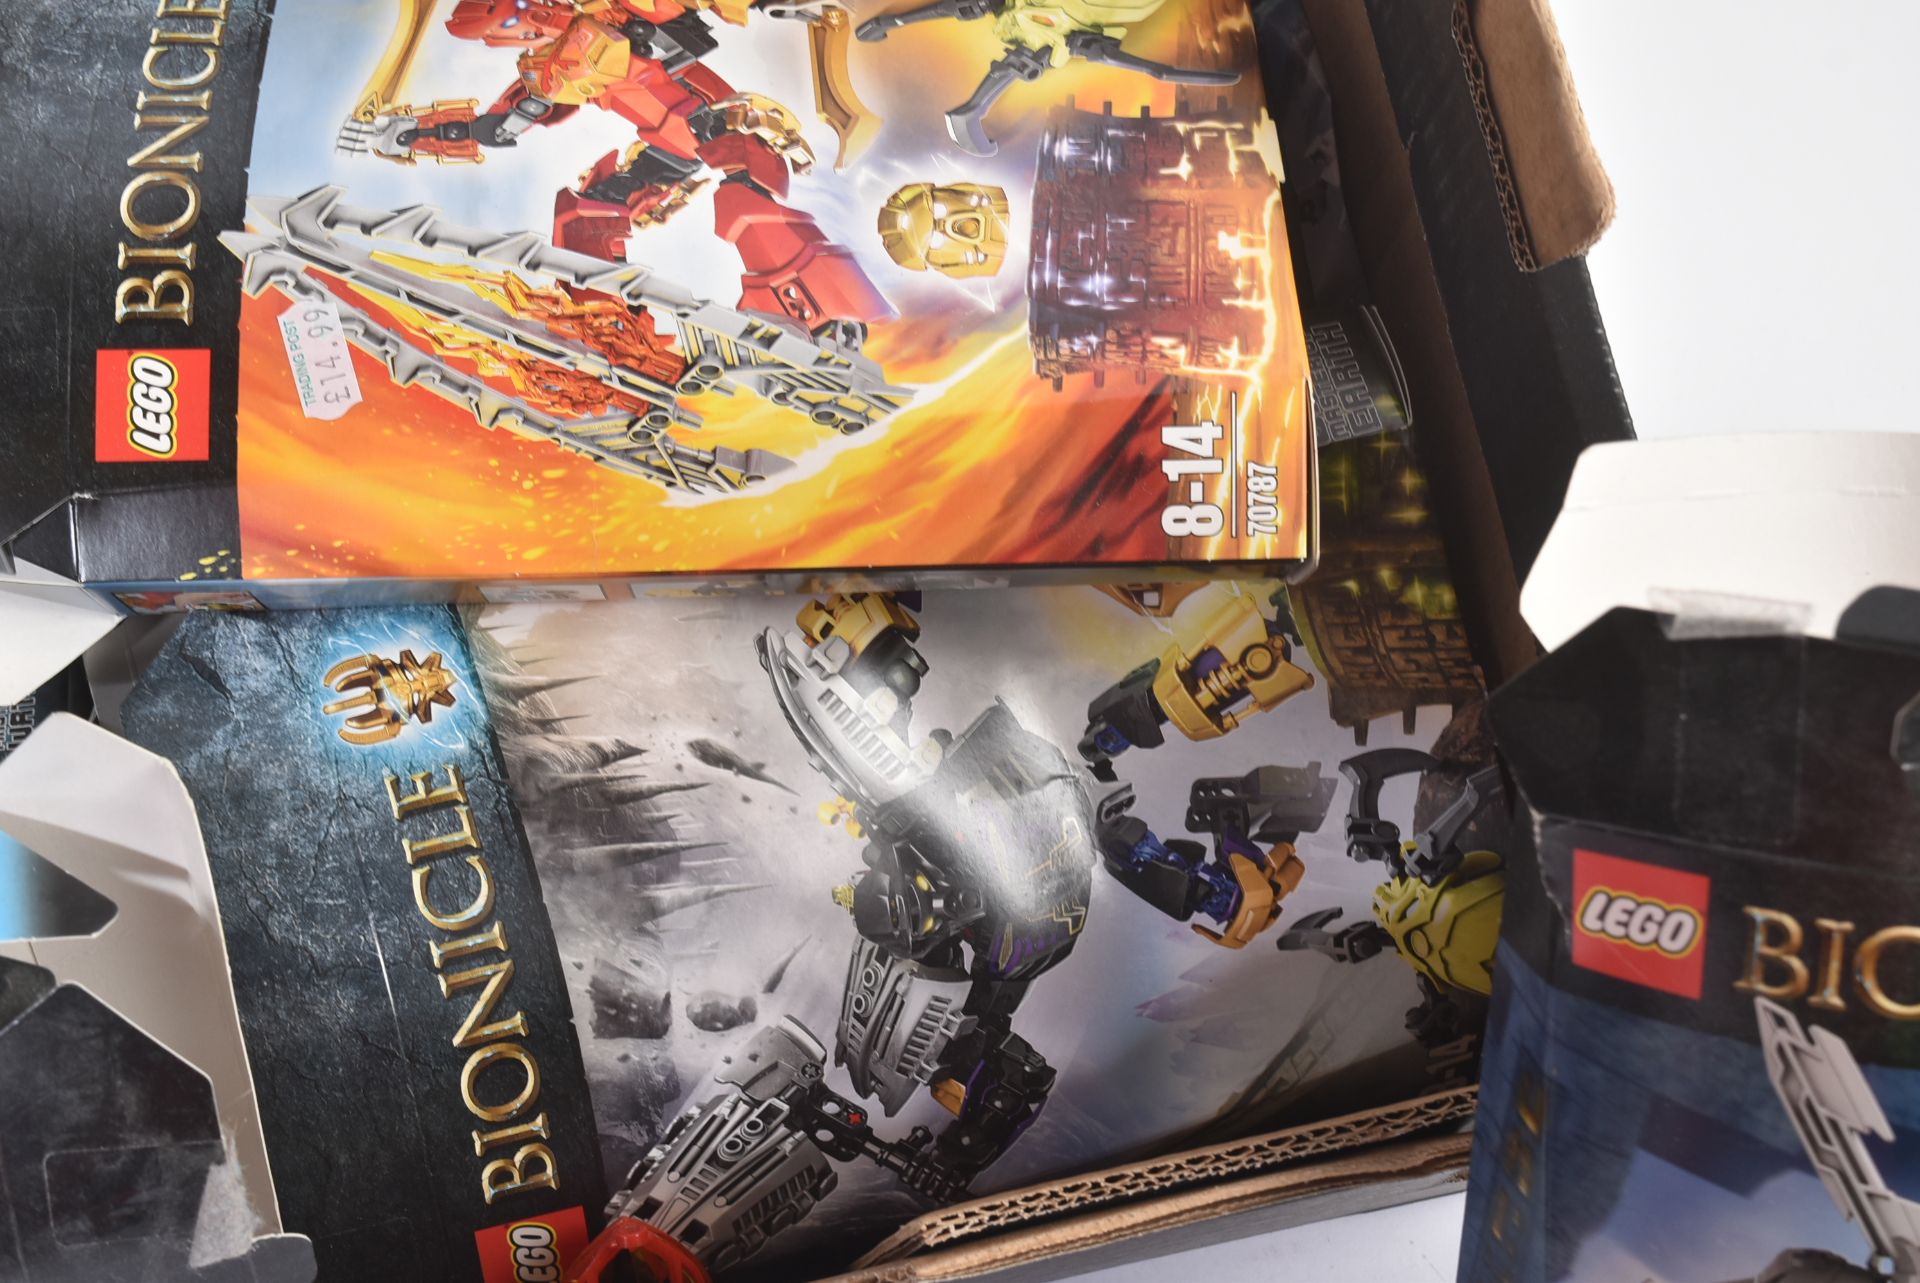 LEGO SETS - COLLECTION OF LEGO BIONICLE SETS - Image 8 of 8